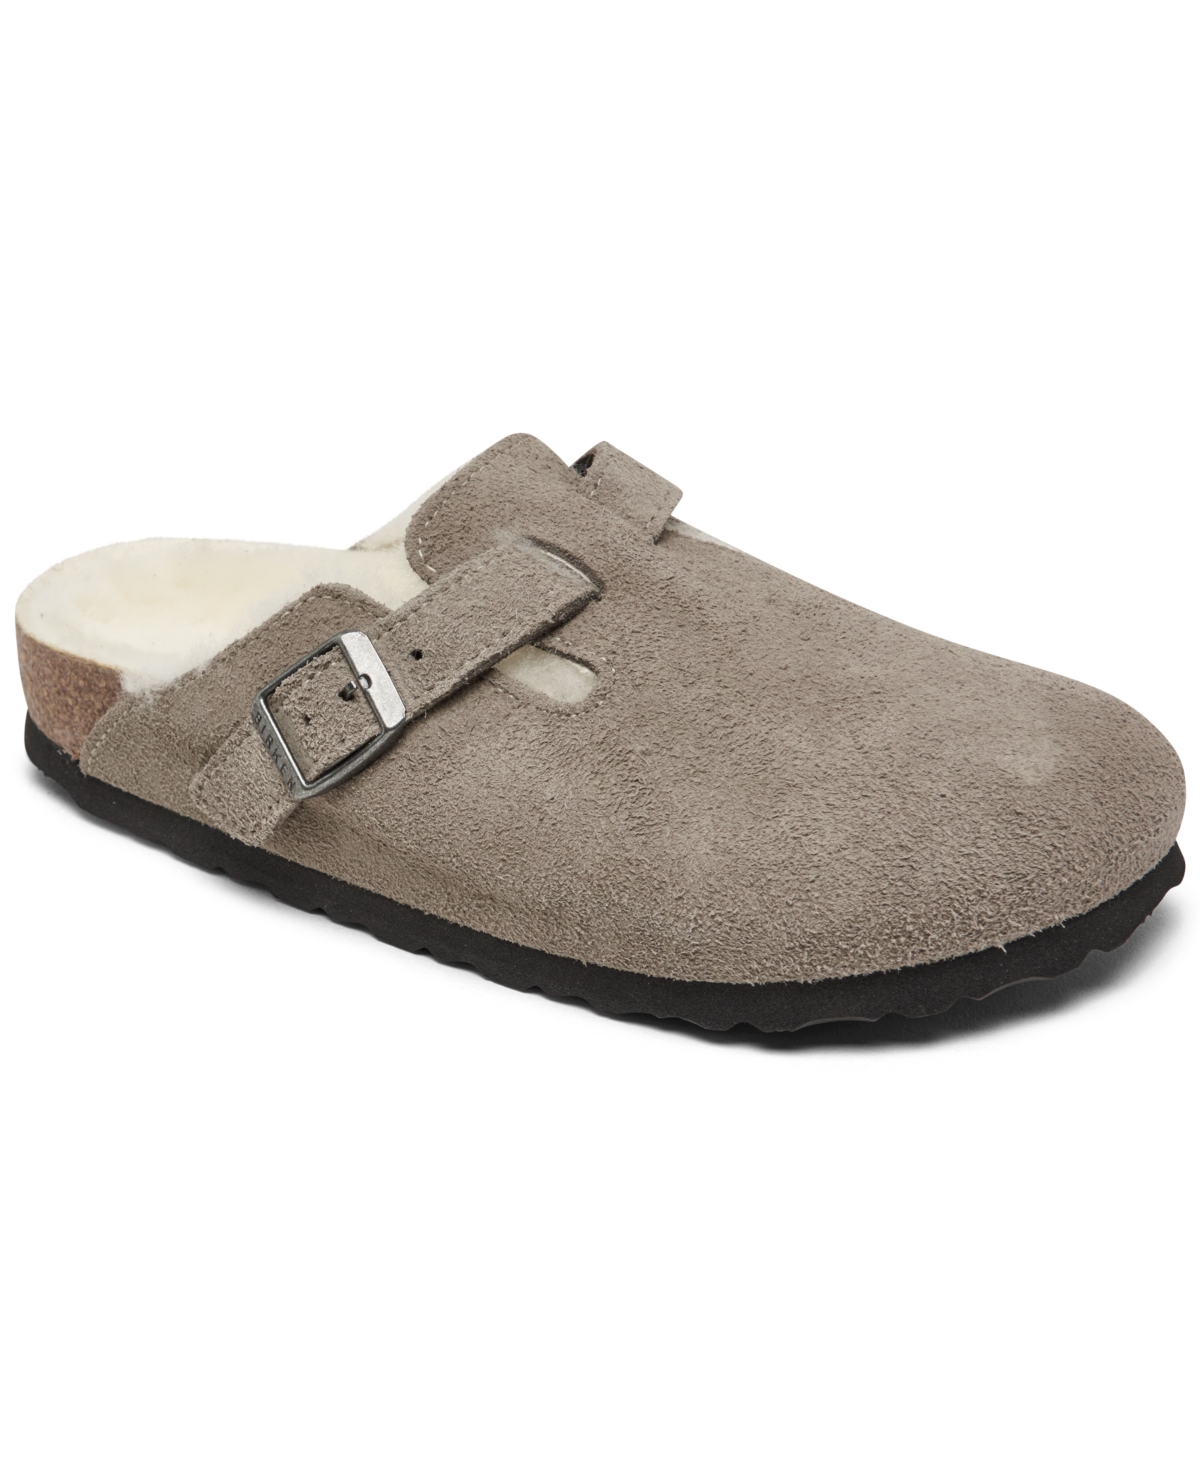 Women's Boston Shearling Suede Leather Clogs from Finish Line - Stone